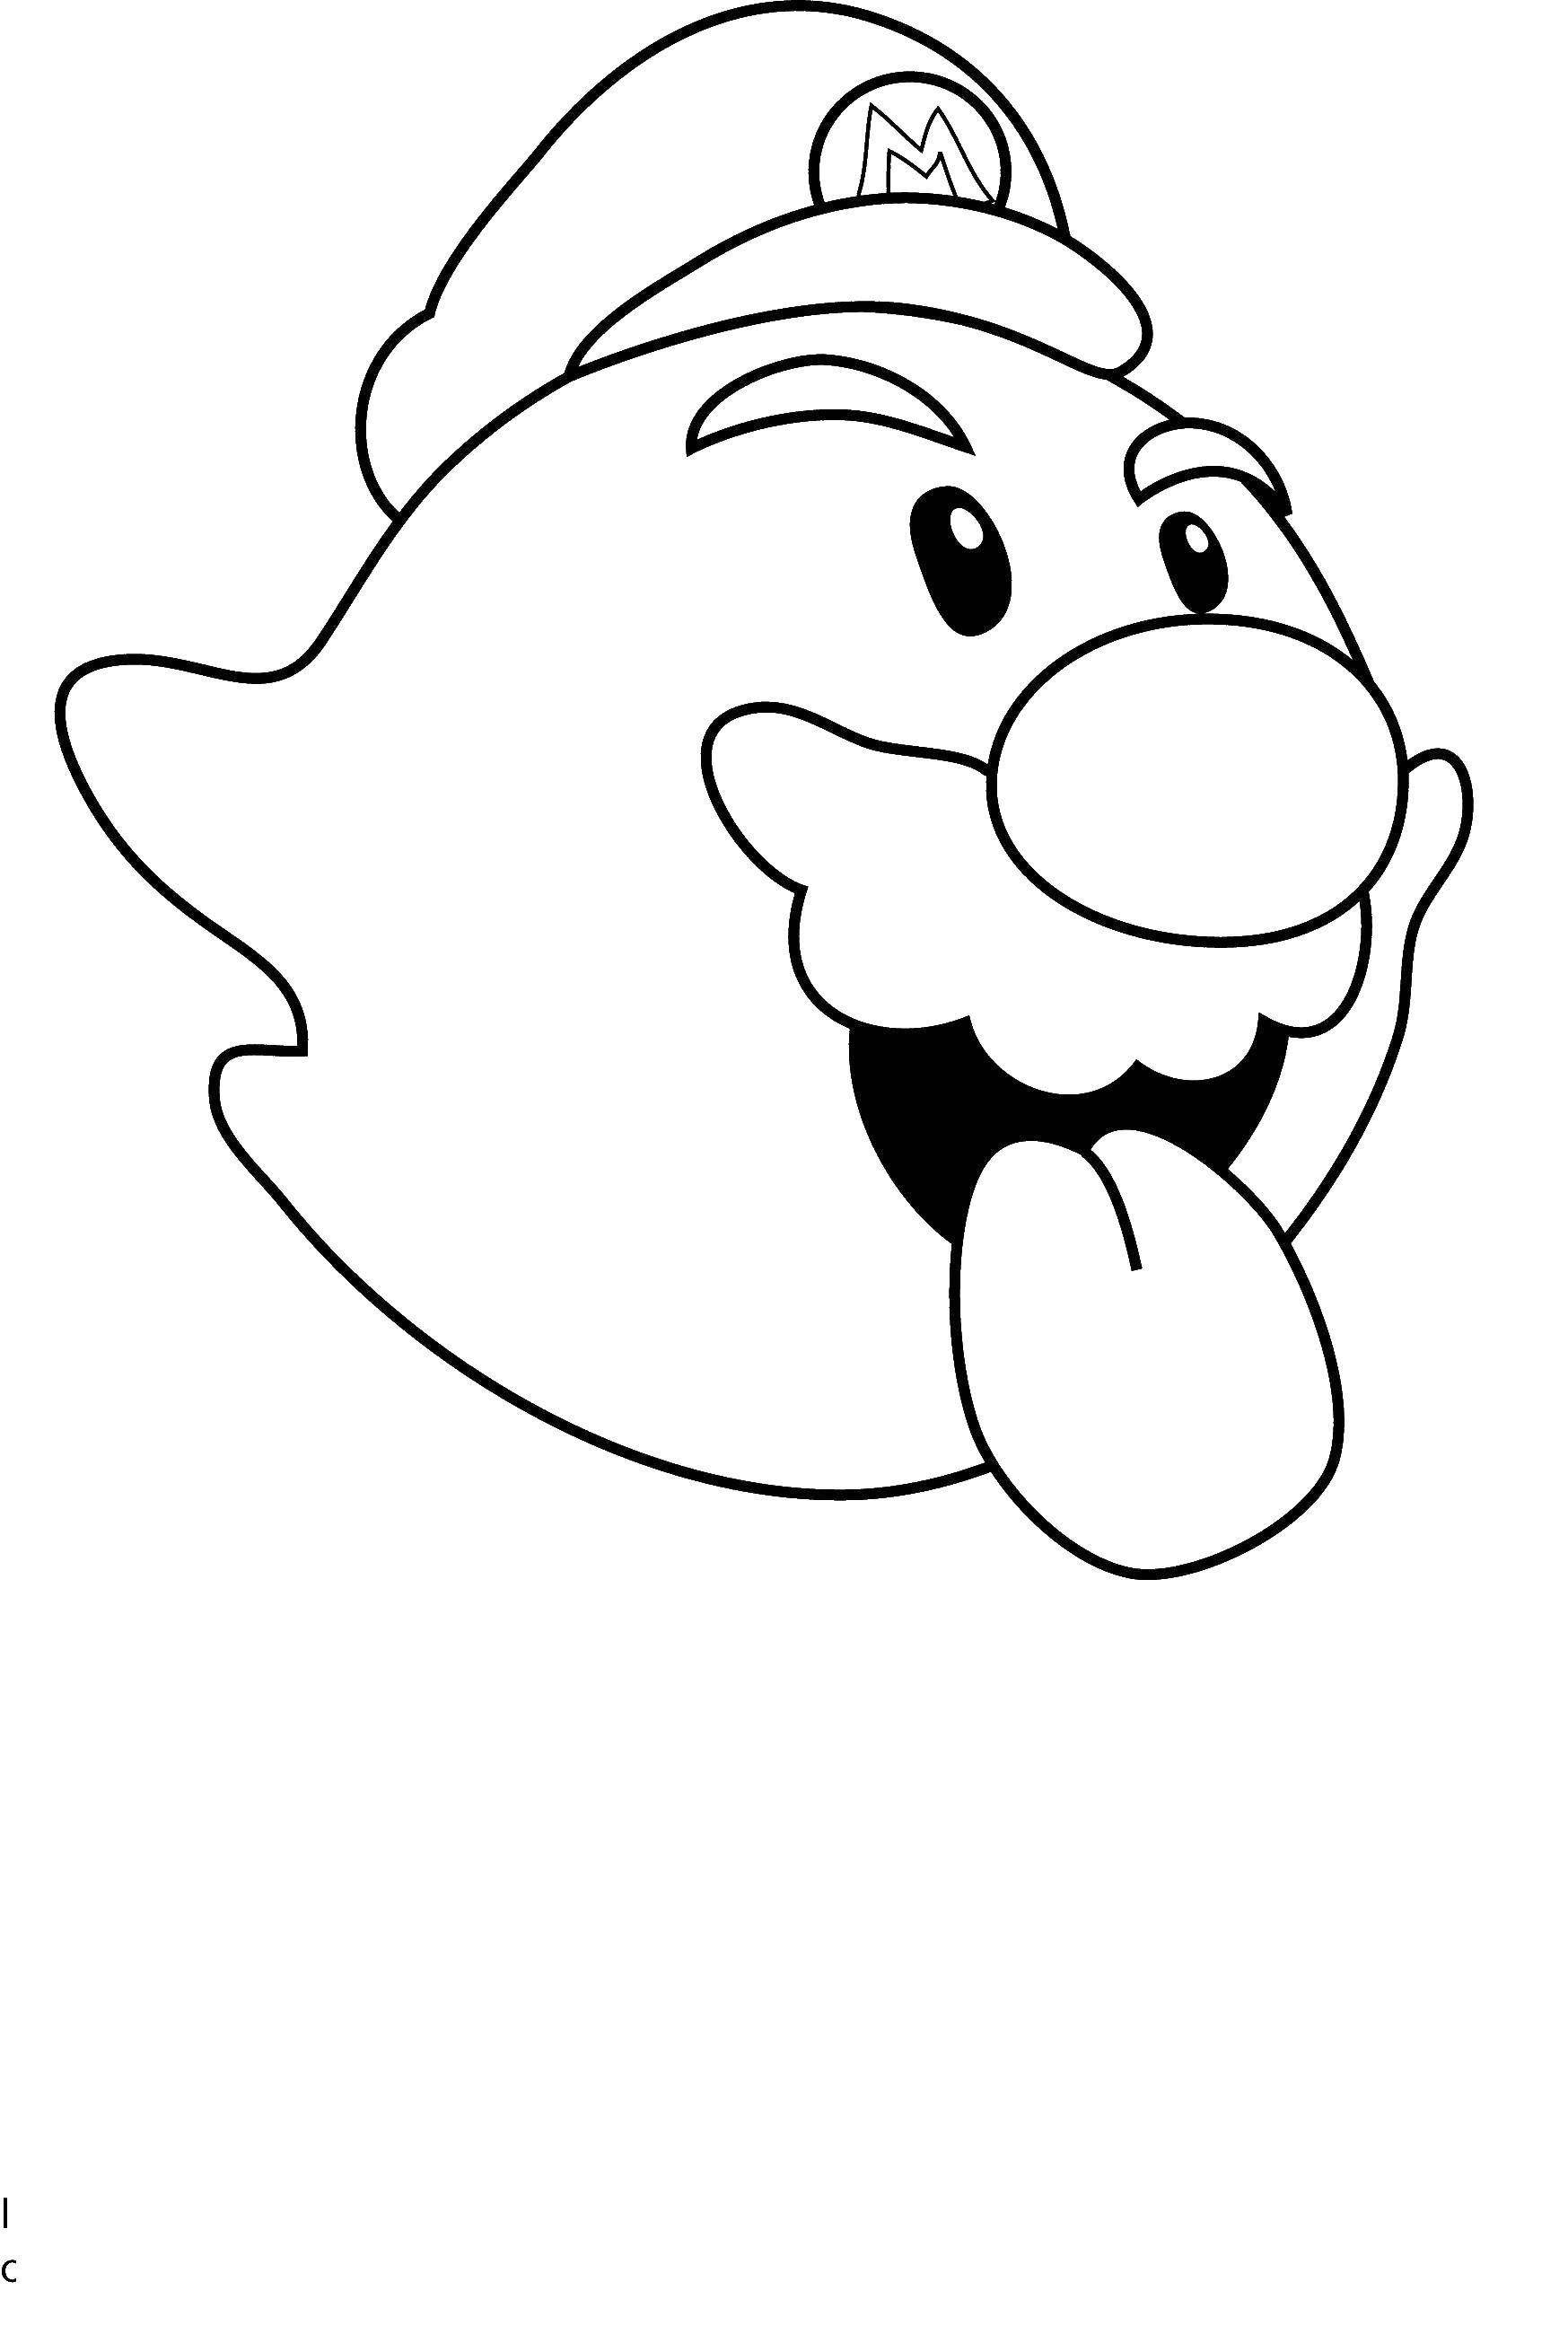 Coloring Super Mario. Category The character from the game. Tags:  super Mario.